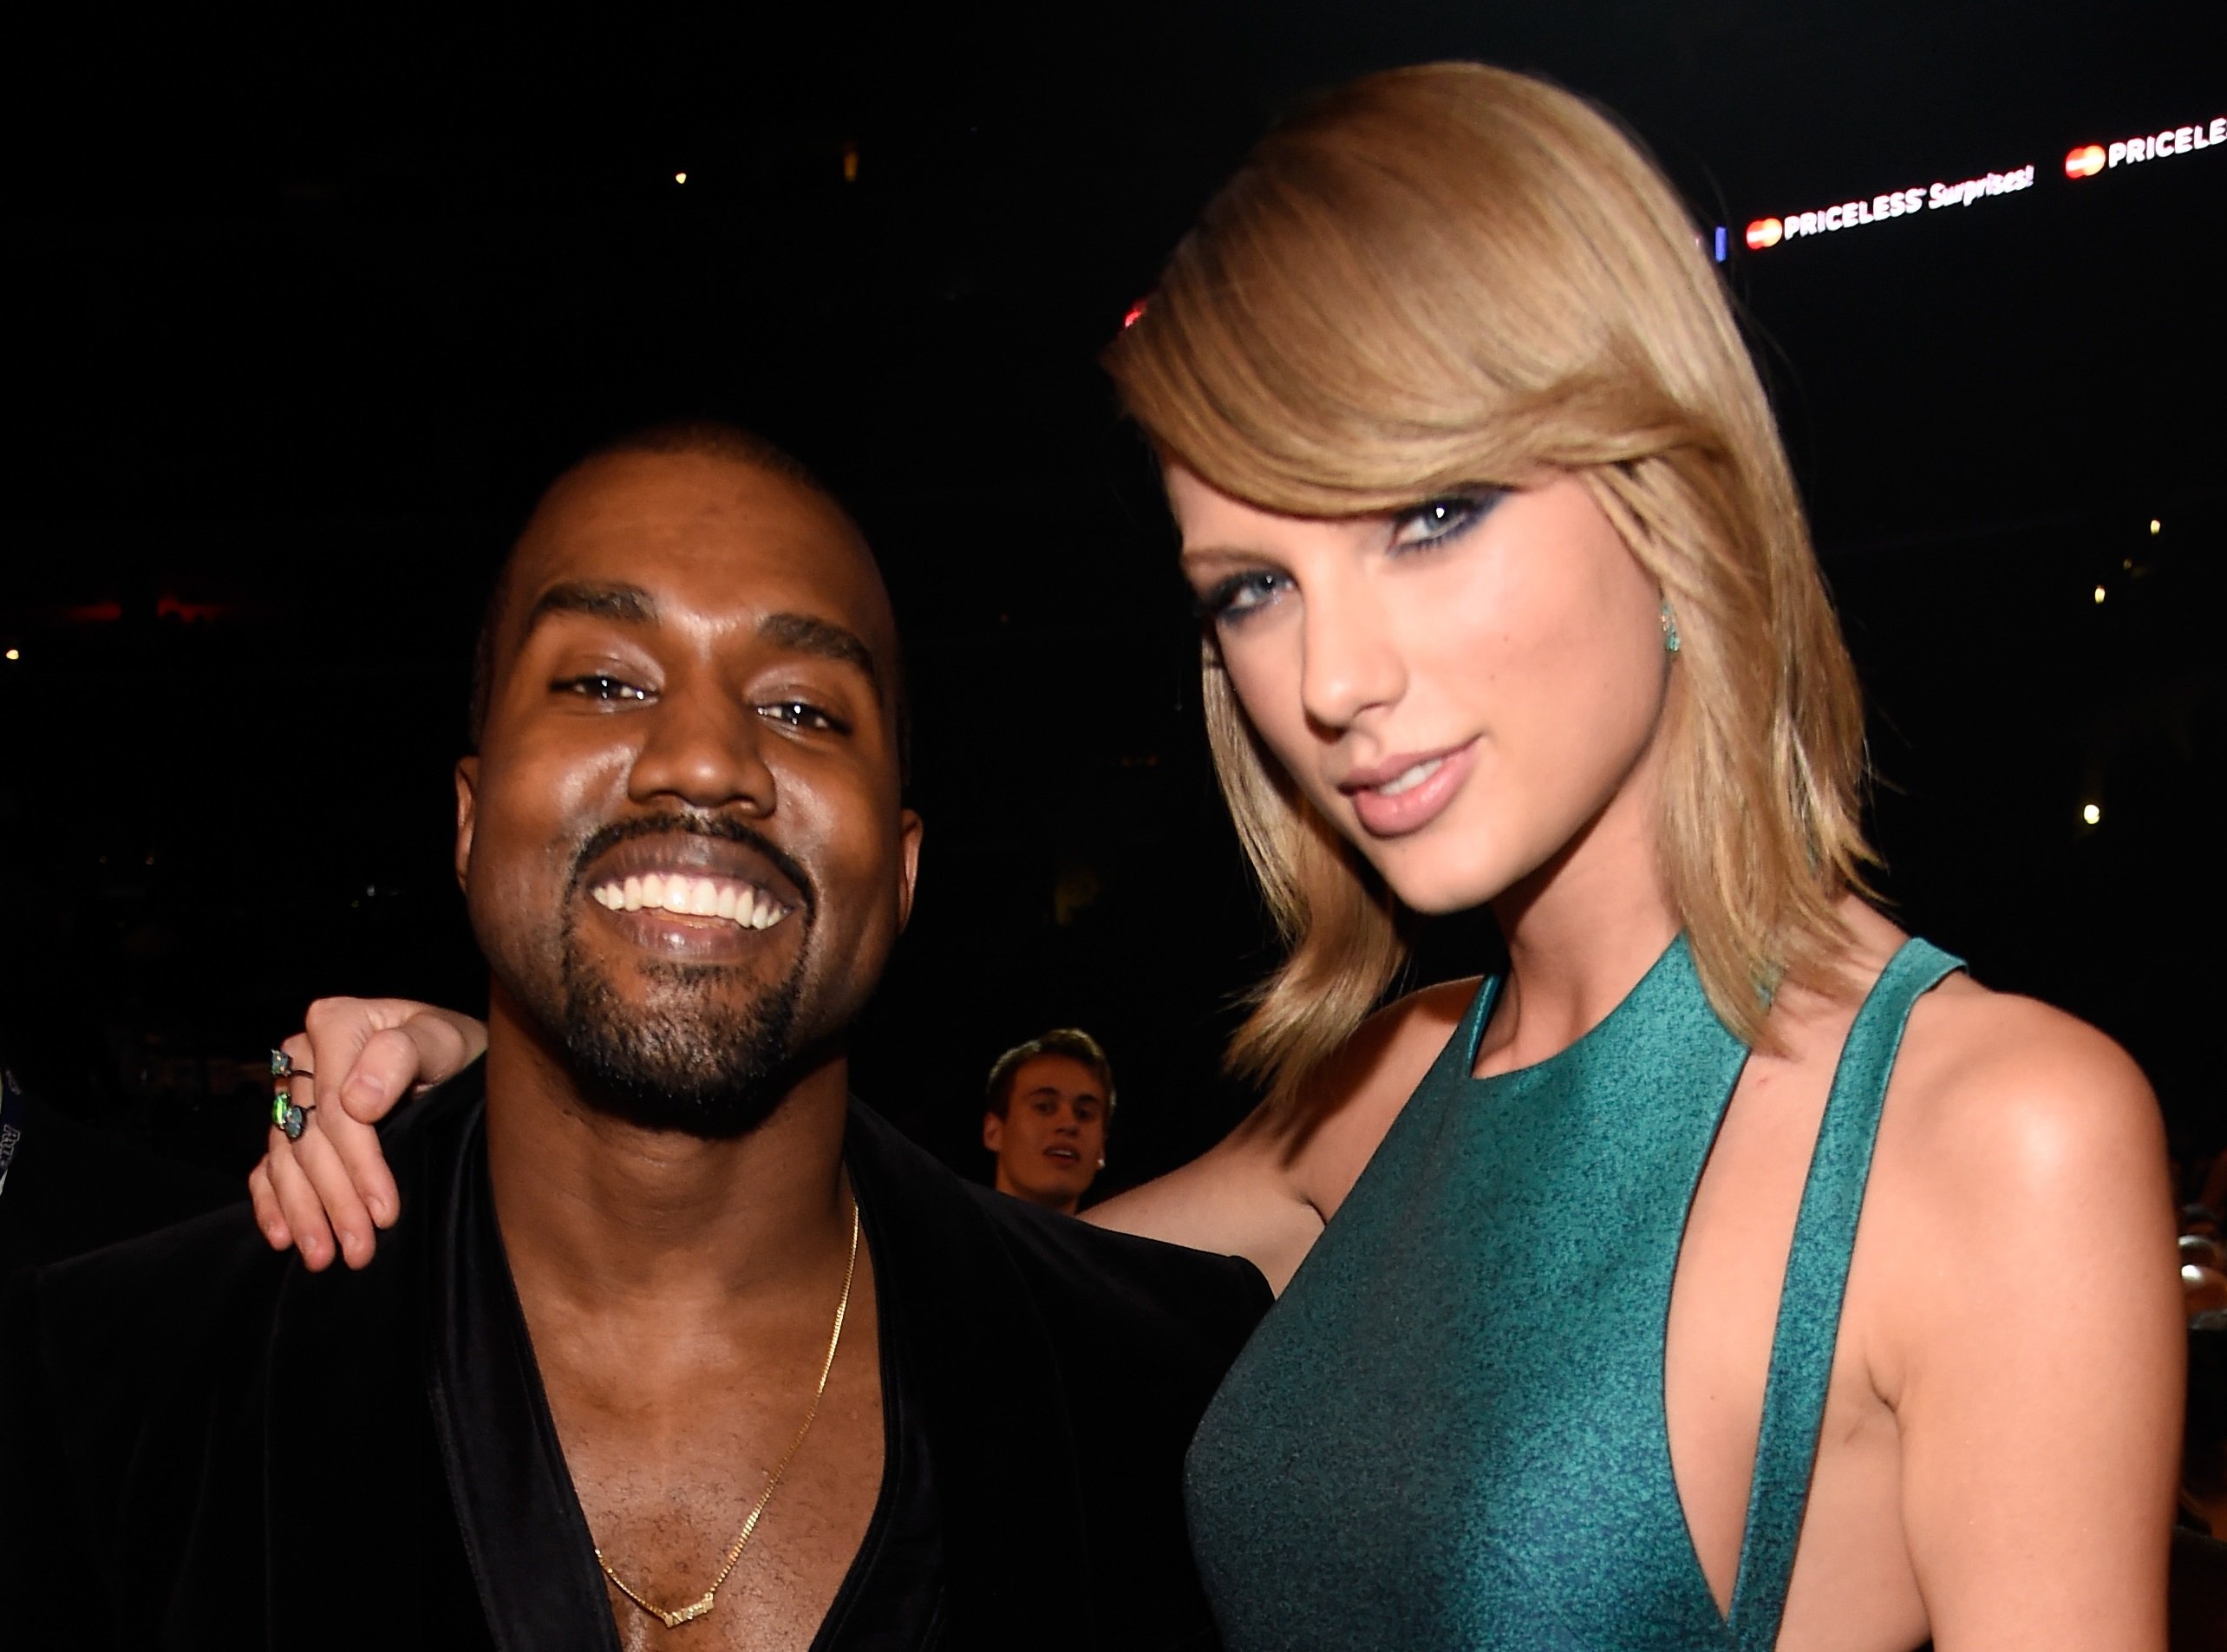 Kanye West and Taylor Swift attend the 57th Annual GRAMMY Awards on February 8, 2015 in Los Angeles, California.